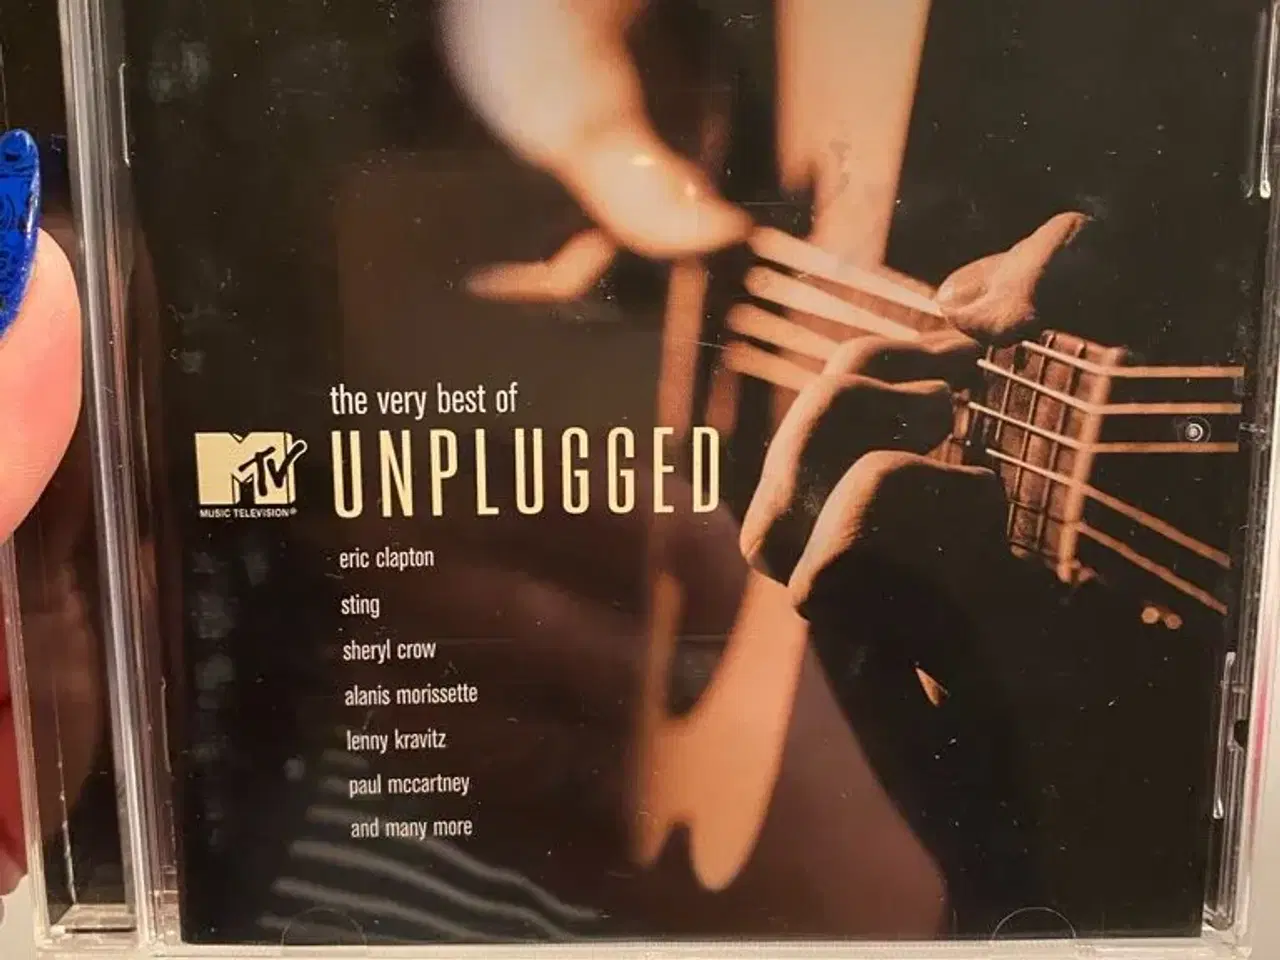 Billede 1 - The very best of MTV unplugged